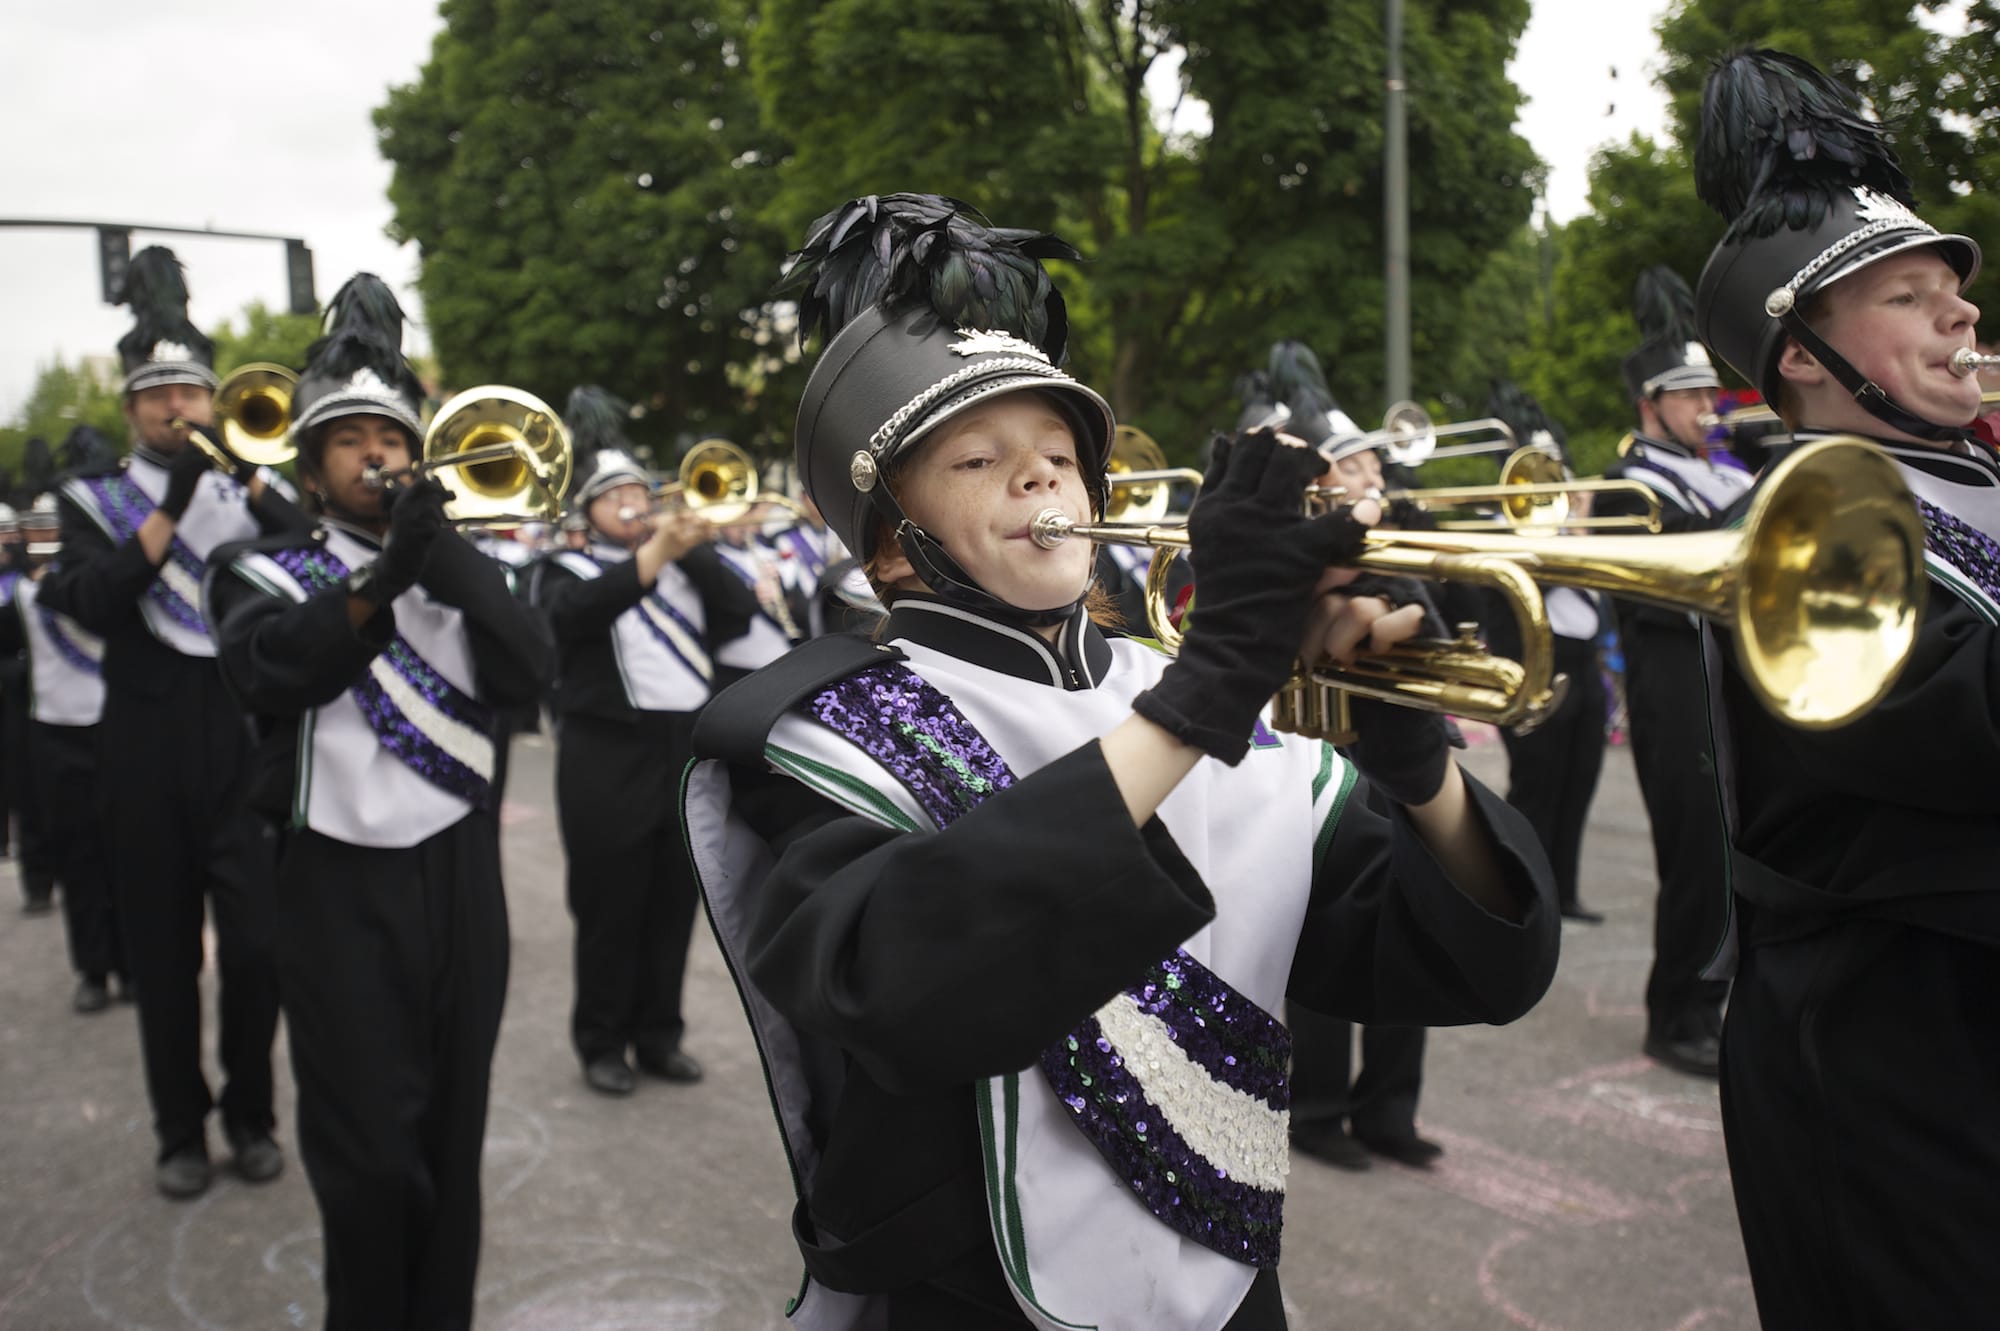 The Heritage High School band won its division -- out of state band with 100 or more members -- Saturday at the Rose Festival Grand Floral Parade in Portland.